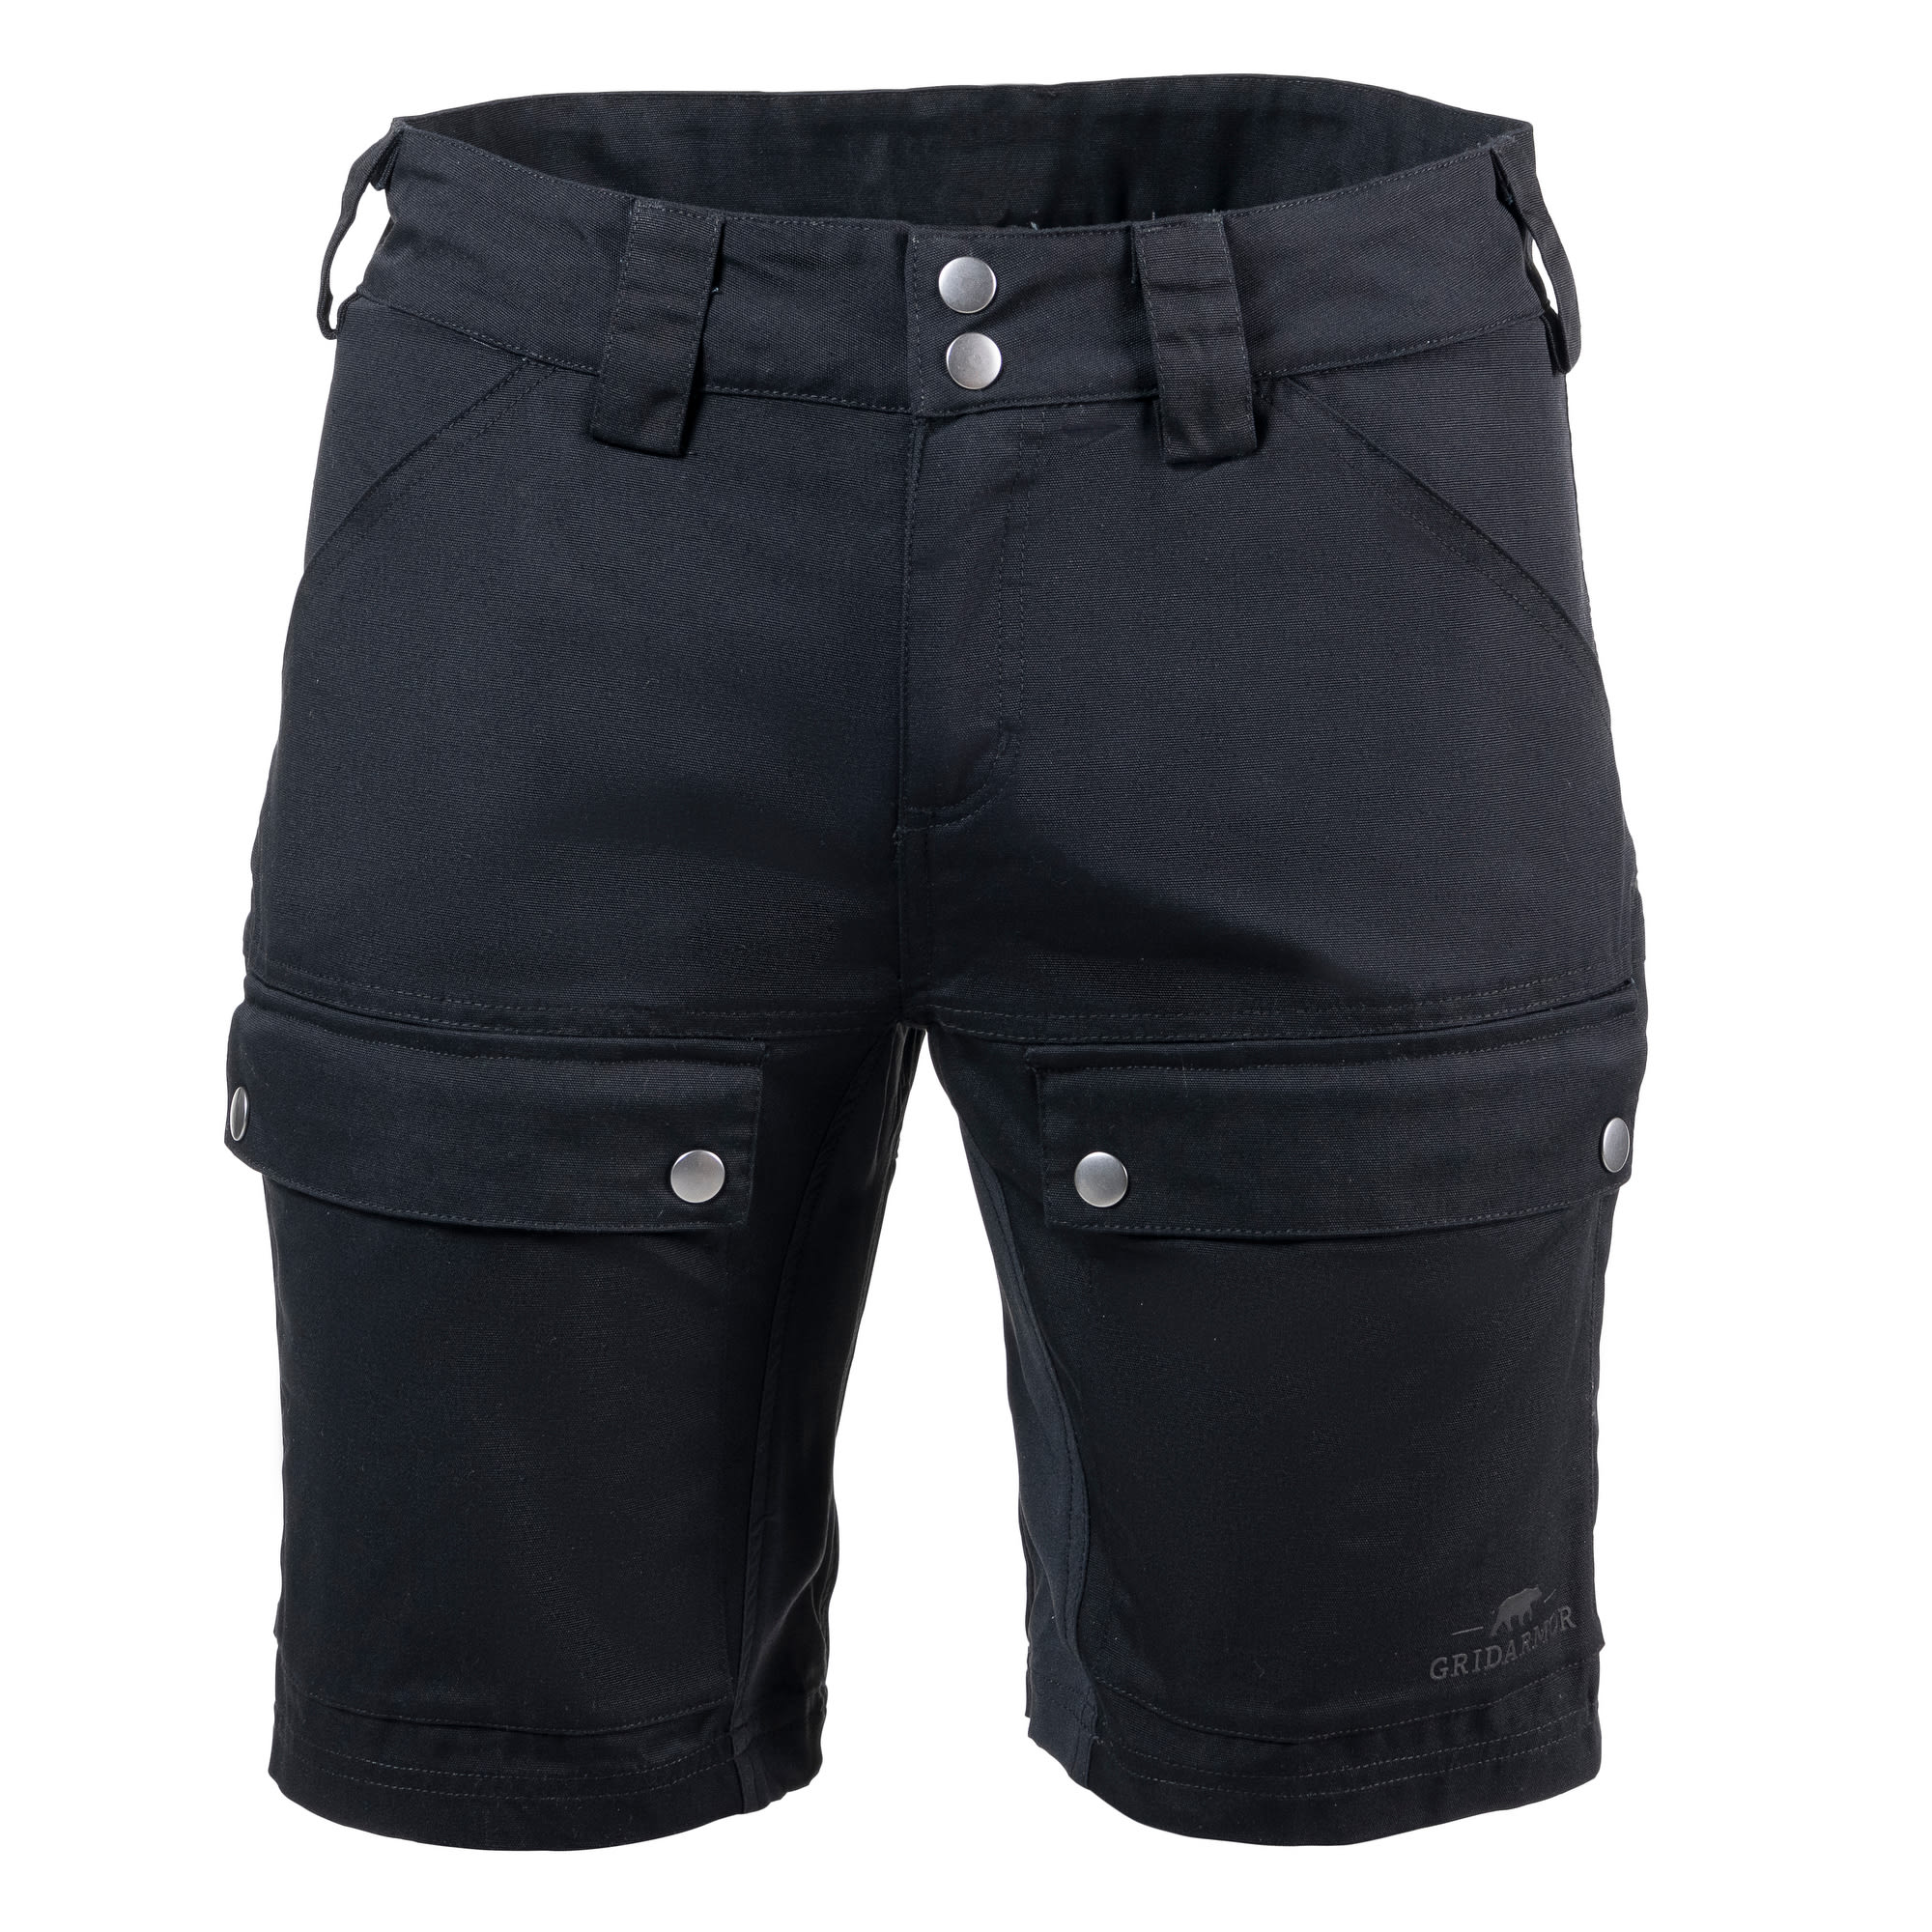 Best Cargo Shorts For Hiking